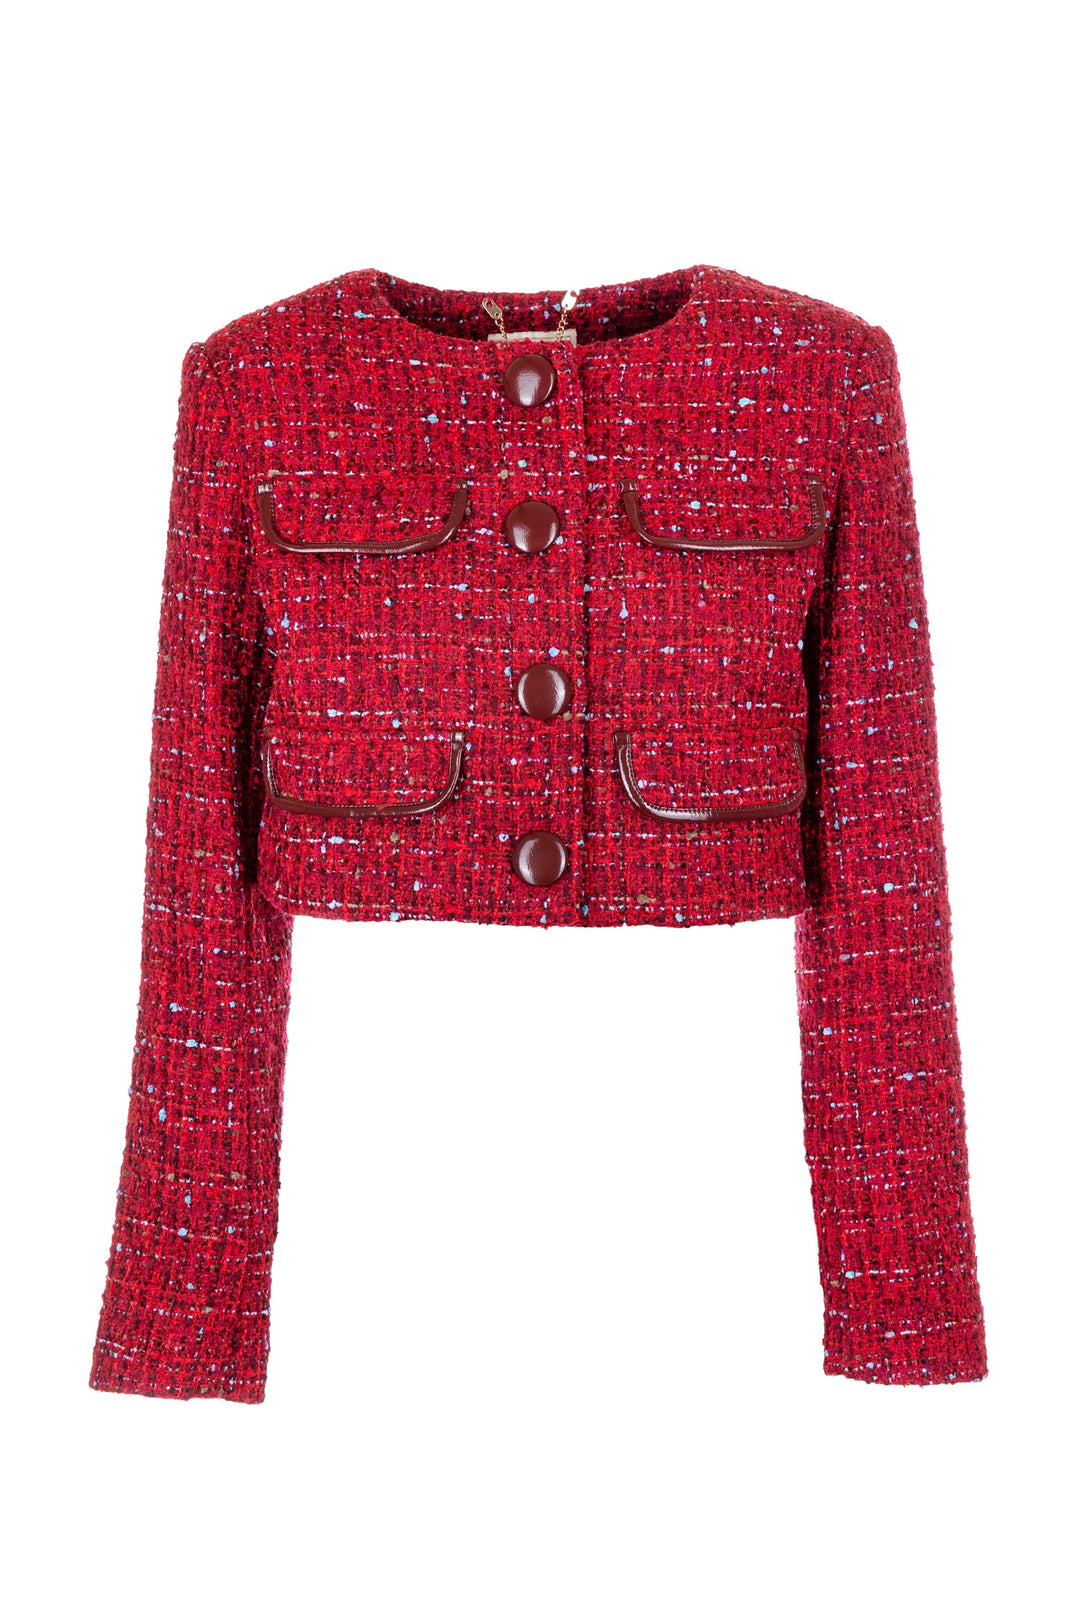 FRACOMINA Giacca cropped rossa in tweed - Mancinelli 1954